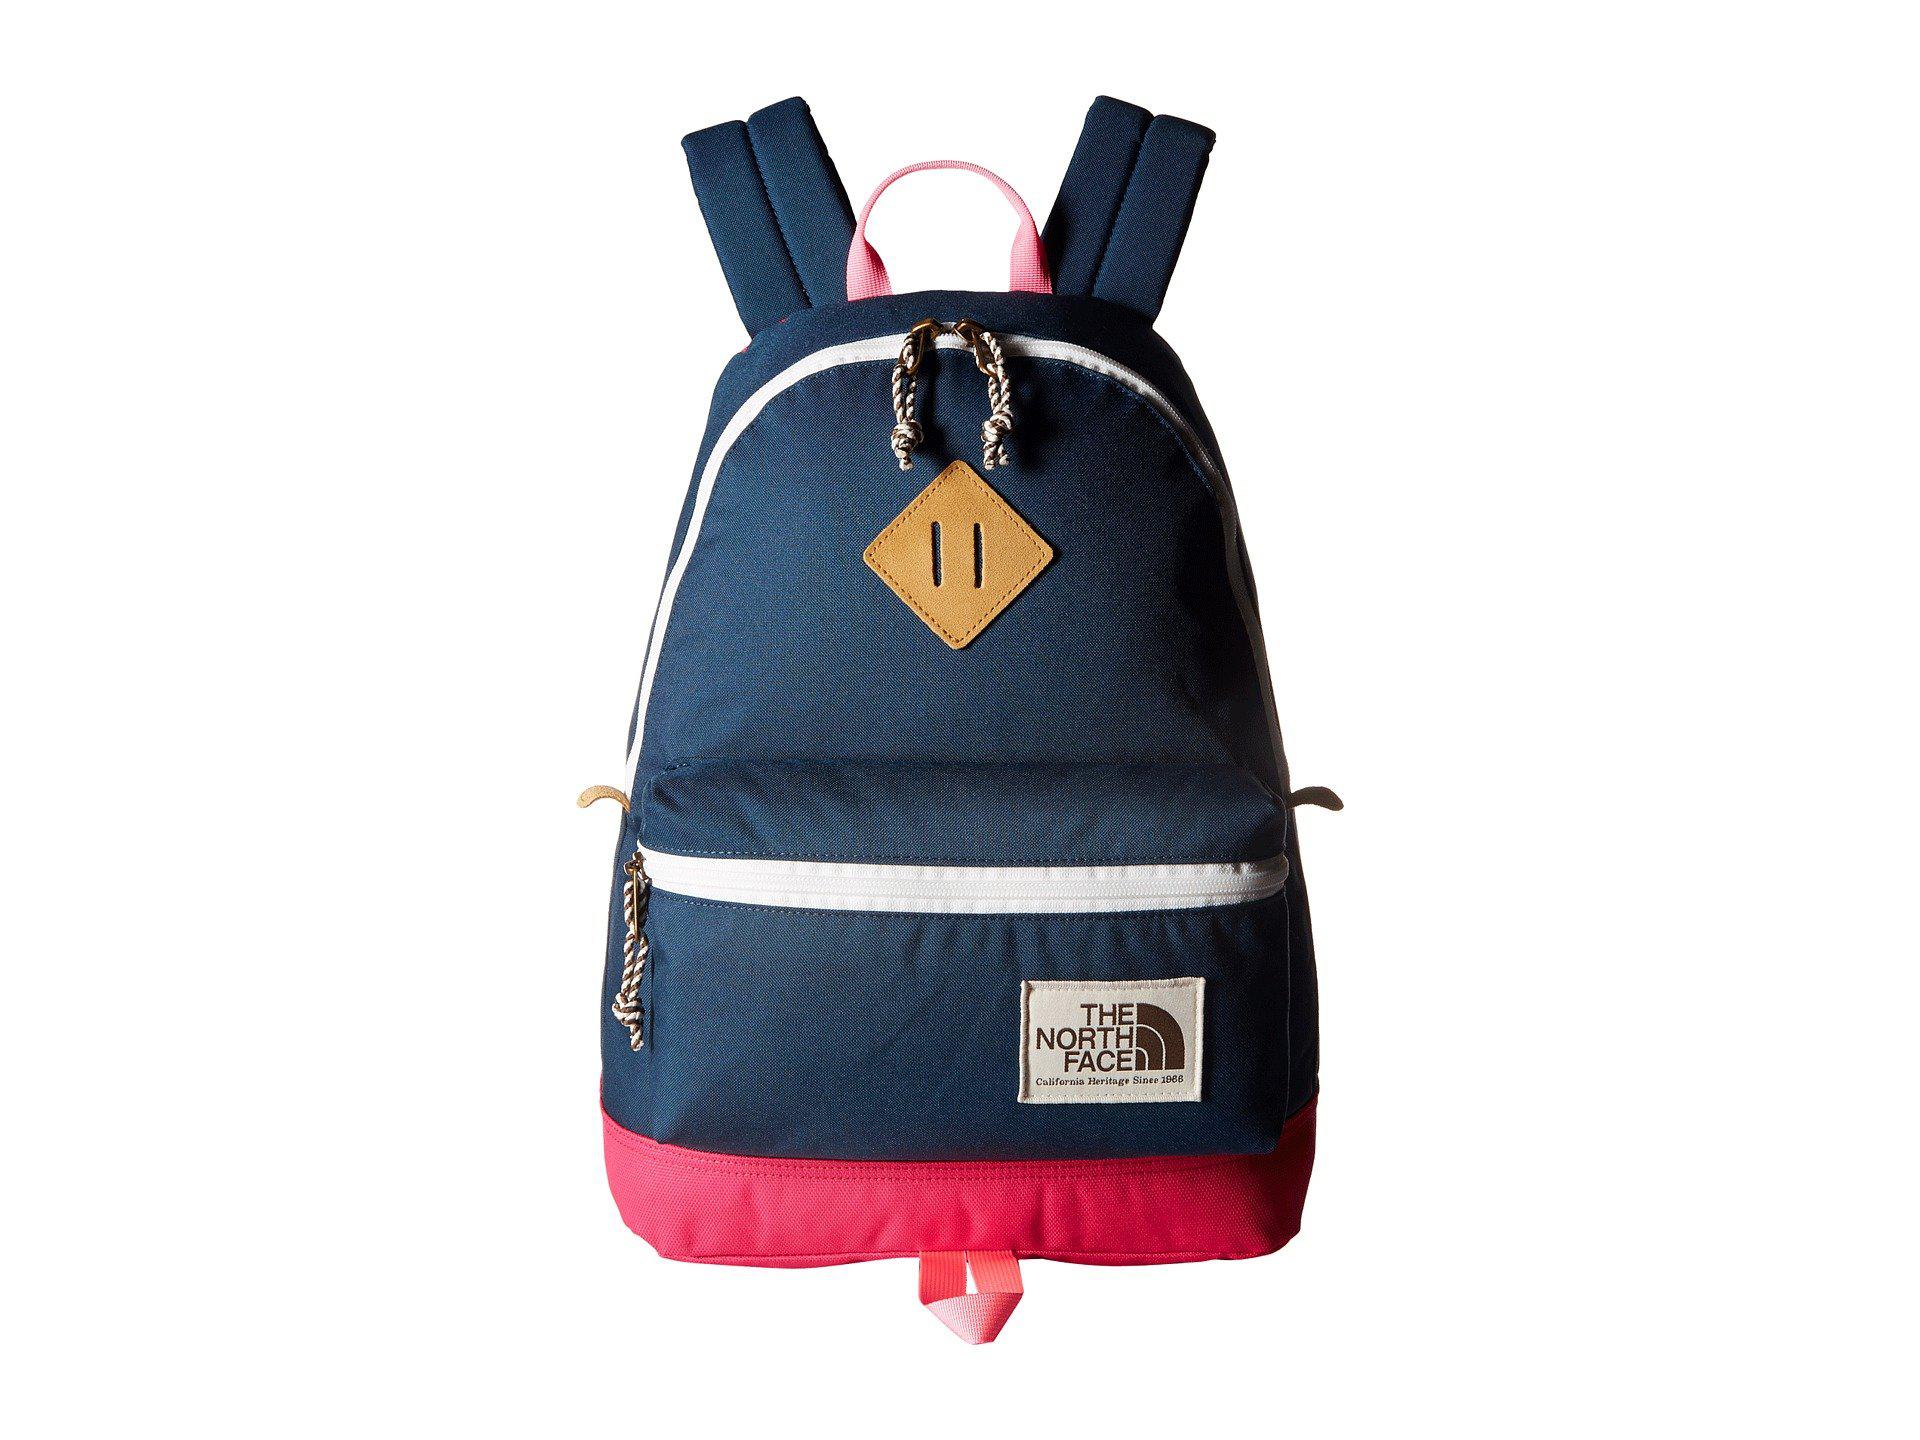 The North Face Mini Berkeley Backpack Online Shopping For Women Men Kids Fashion Lifestyle Free Delivery Returns